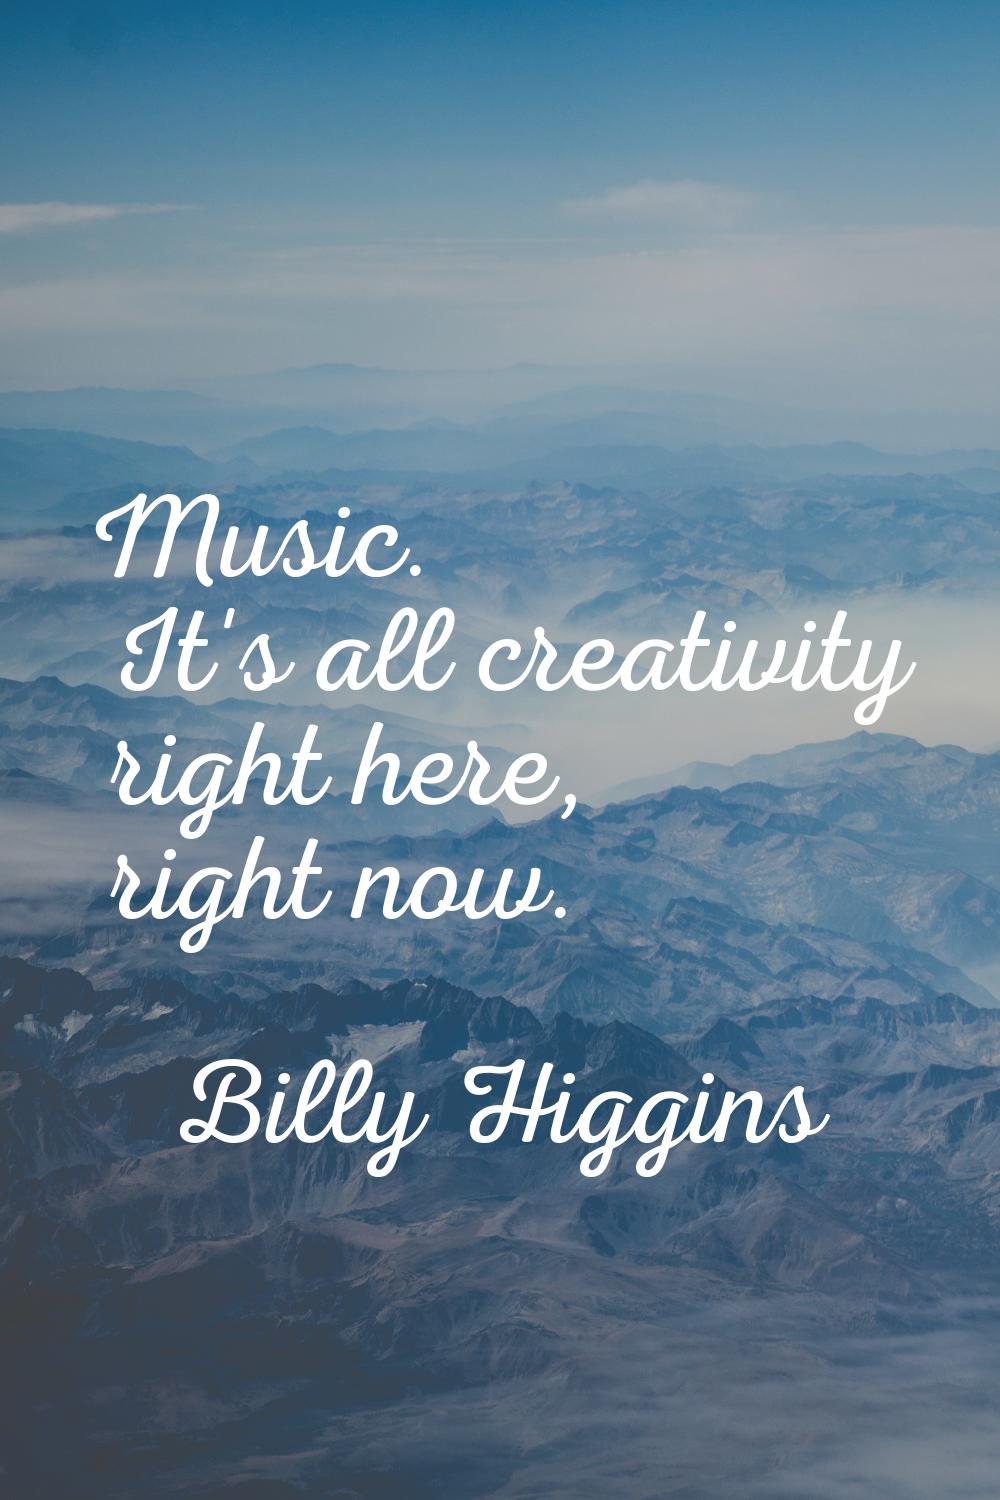 Music. It's all creativity right here, right now.